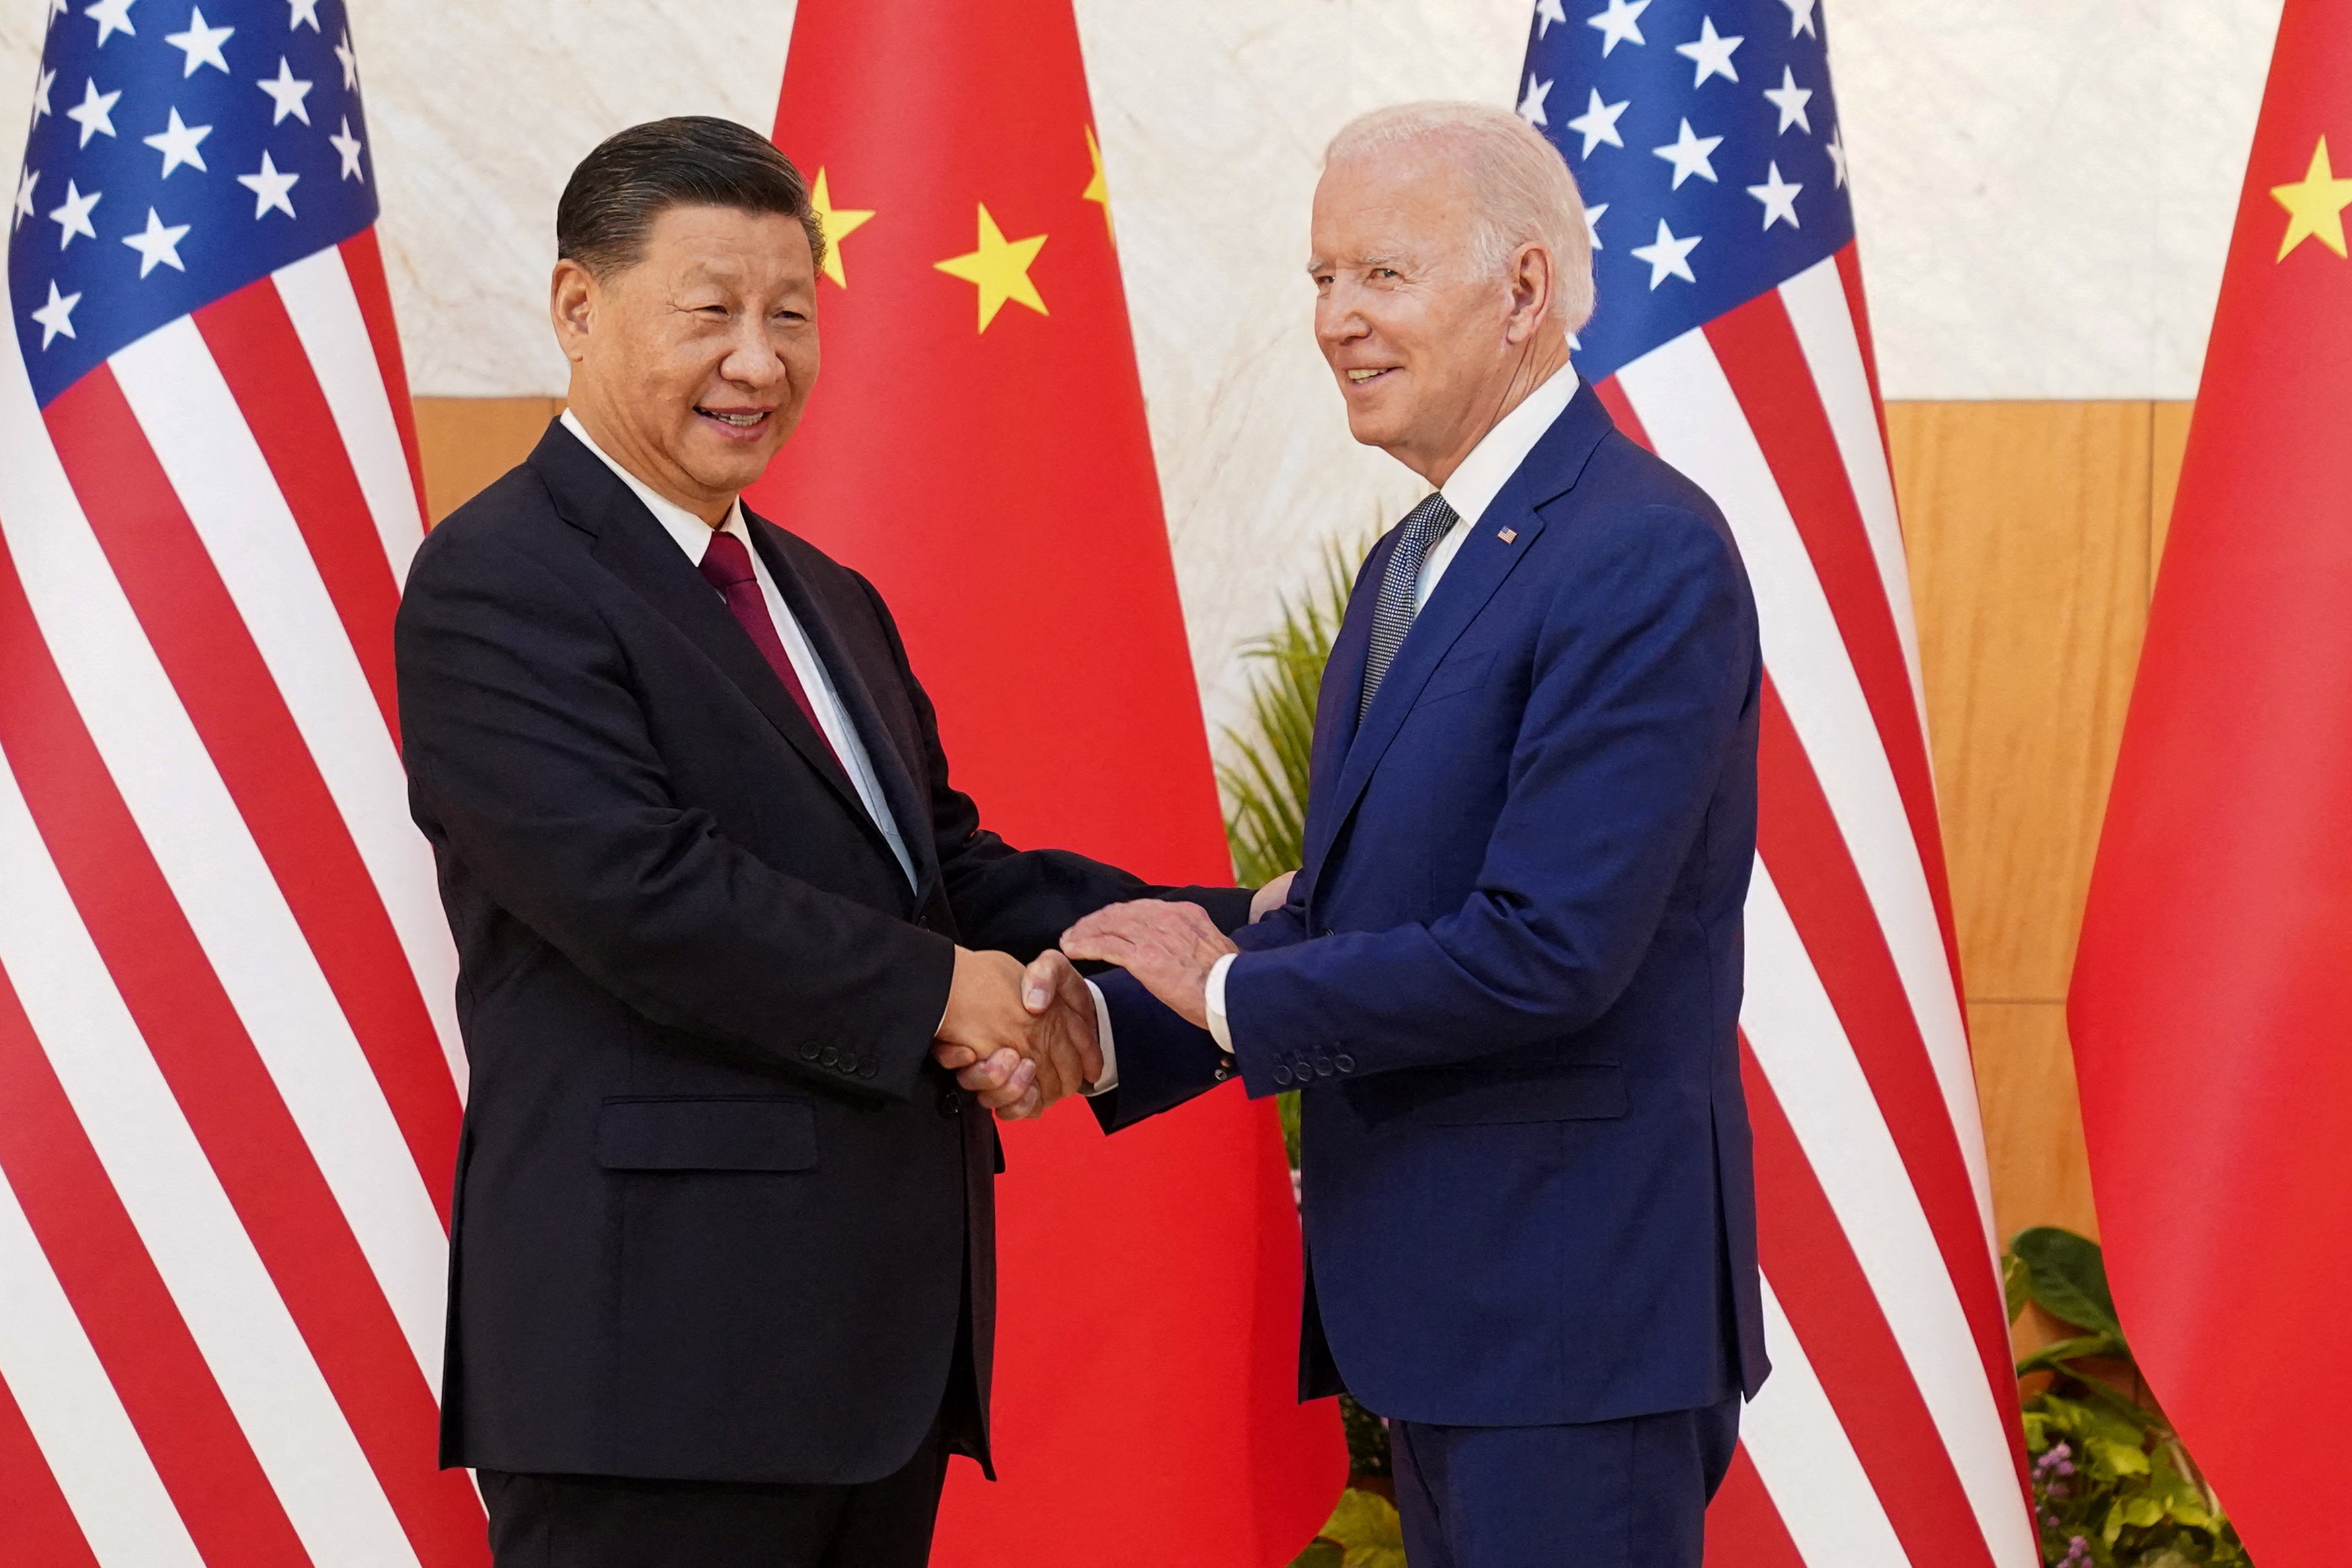 President Joe Biden shakes hands with Chinese President Xi Jinping at the G20 leaders' summit in Bali, Indonesia on Nov. 14. 